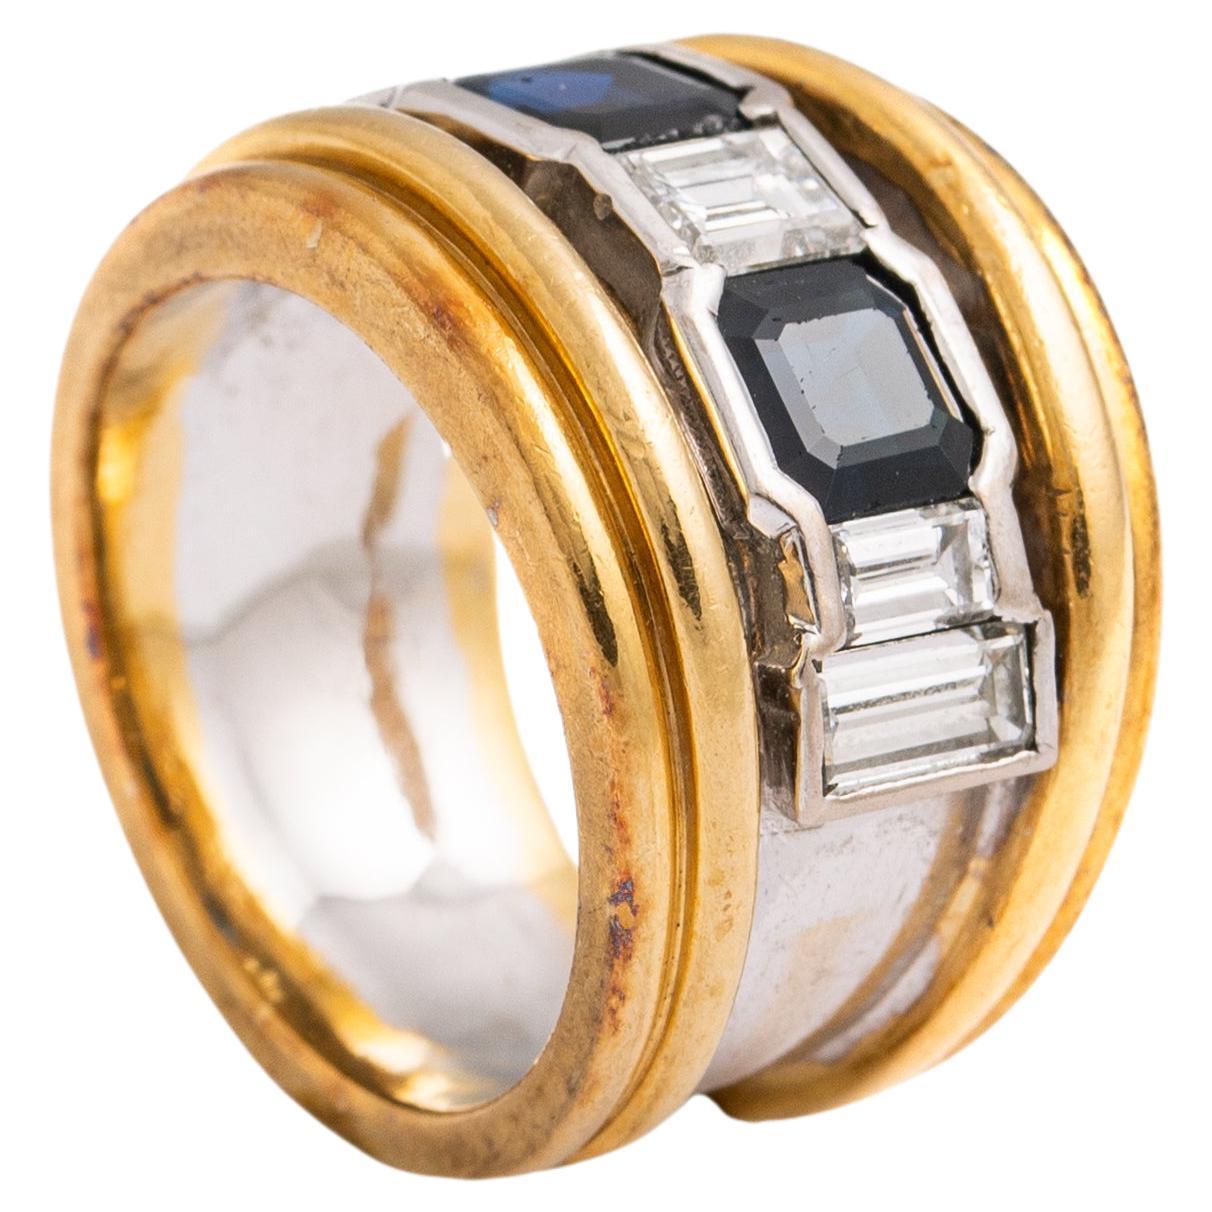 Vasari Sapphire Diamond Gold 18K Ring.
Signed Vasari.
Can be polished upon request.

Sapphire weight: approximately estimated 0.60-0.80 carat each.
Diamond total weight: approximately estimated 1.00 carat.
Total weight: 13.84 grams.
Size: 52 / 6 US.